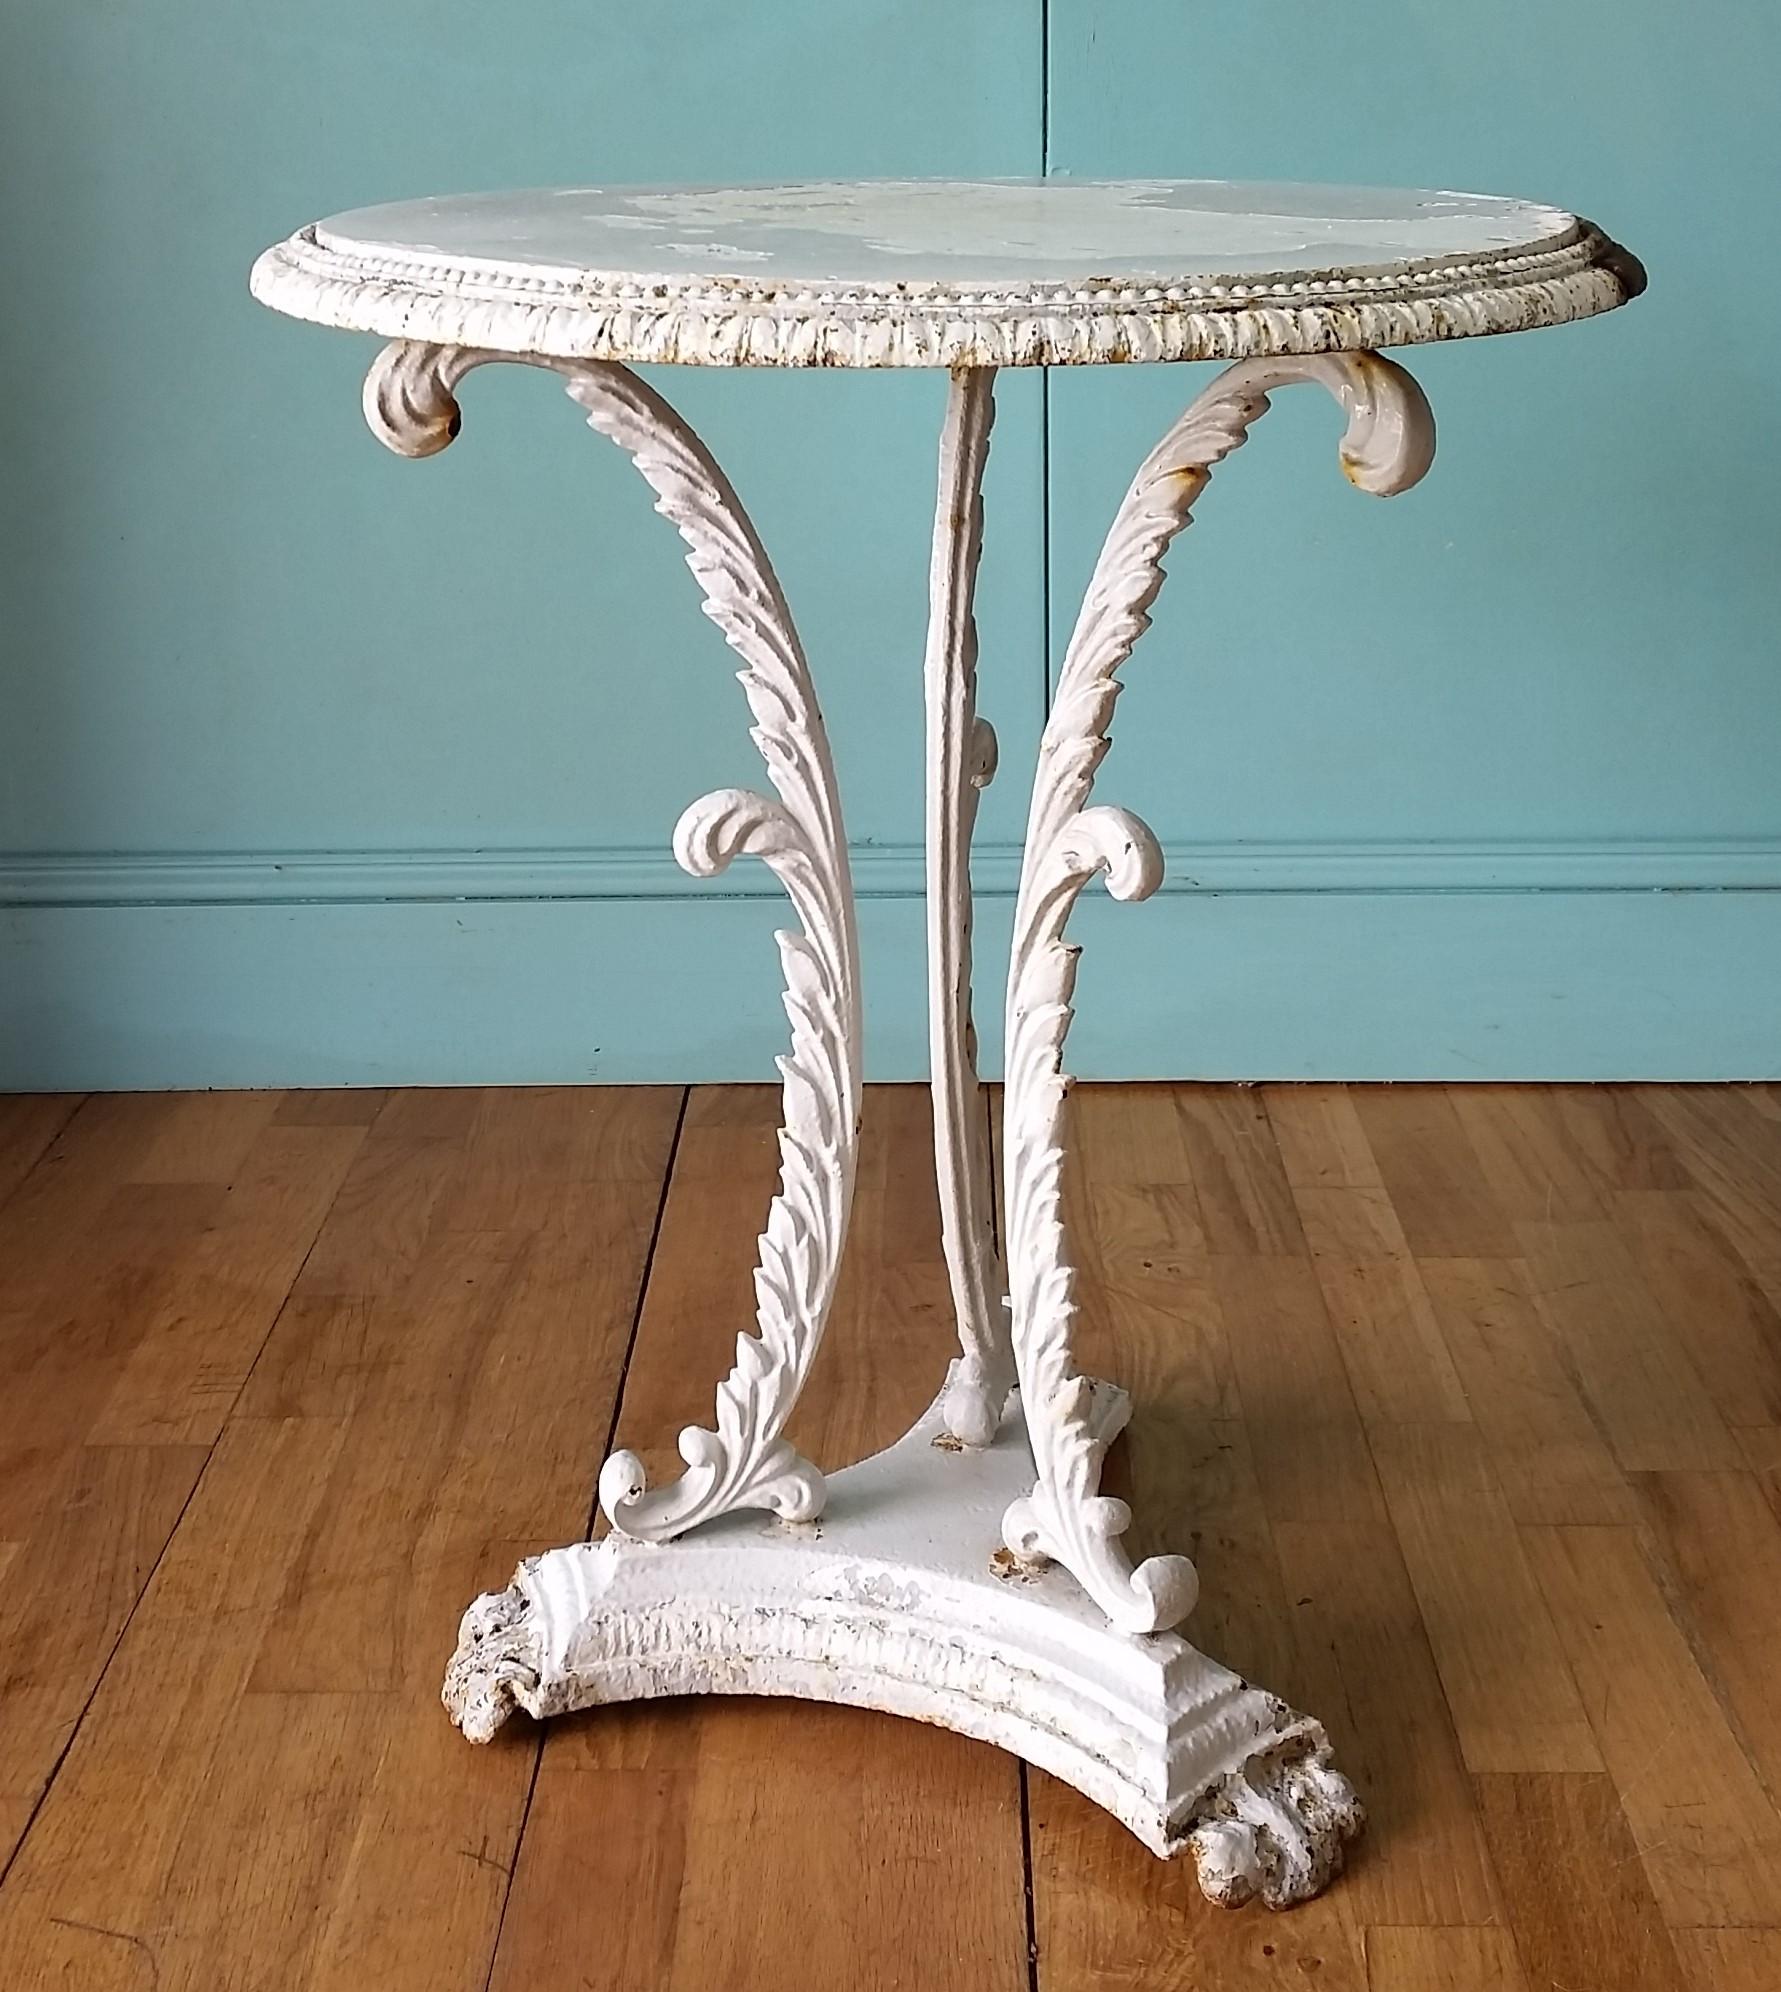 Antique English cast iron side table circa 1850 - 1880's
Decorative trifold base with acanthus leaves and lion paw feet with original iron table top.
Antique white paint finish has worn from exposure to the elements to produce a lovely authentic